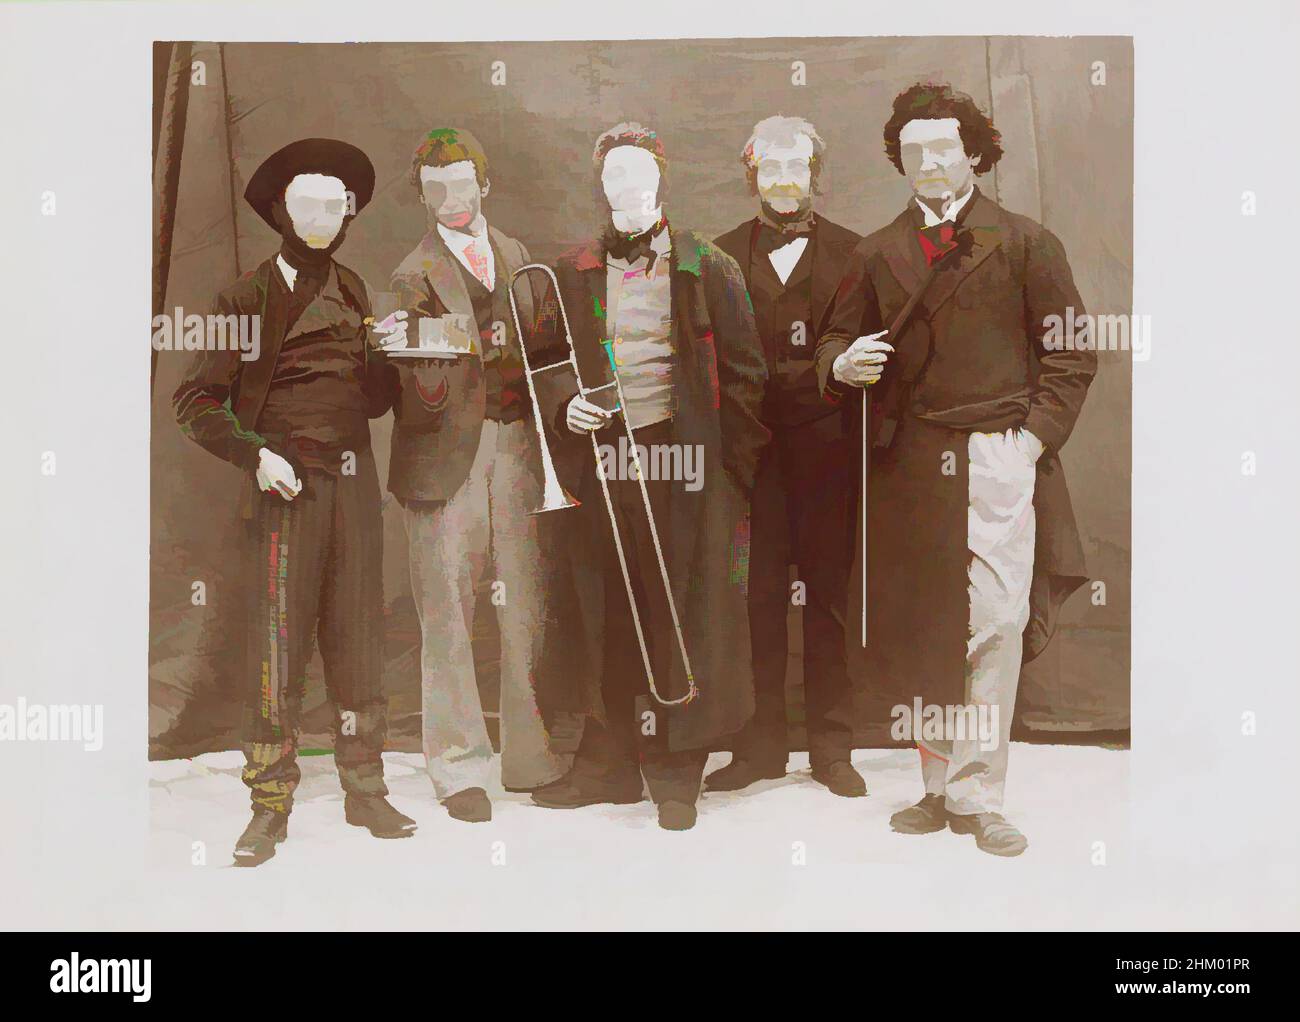 Art inspired by Group portrait of a company in costumes with musical instruments, presumably French amateur actors, Part of Photo album of a French amateur photographer with shots of a family, distillery Delizy &amp; Doistau Fils, the army and places of interest in France., France, c, Classic works modernized by Artotop with a splash of modernity. Shapes, color and value, eye-catching visual impact on art. Emotions through freedom of artworks in a contemporary way. A timeless message pursuing a wildly creative new direction. Artists turning to the digital medium and creating the Artotop NFT Stock Photo